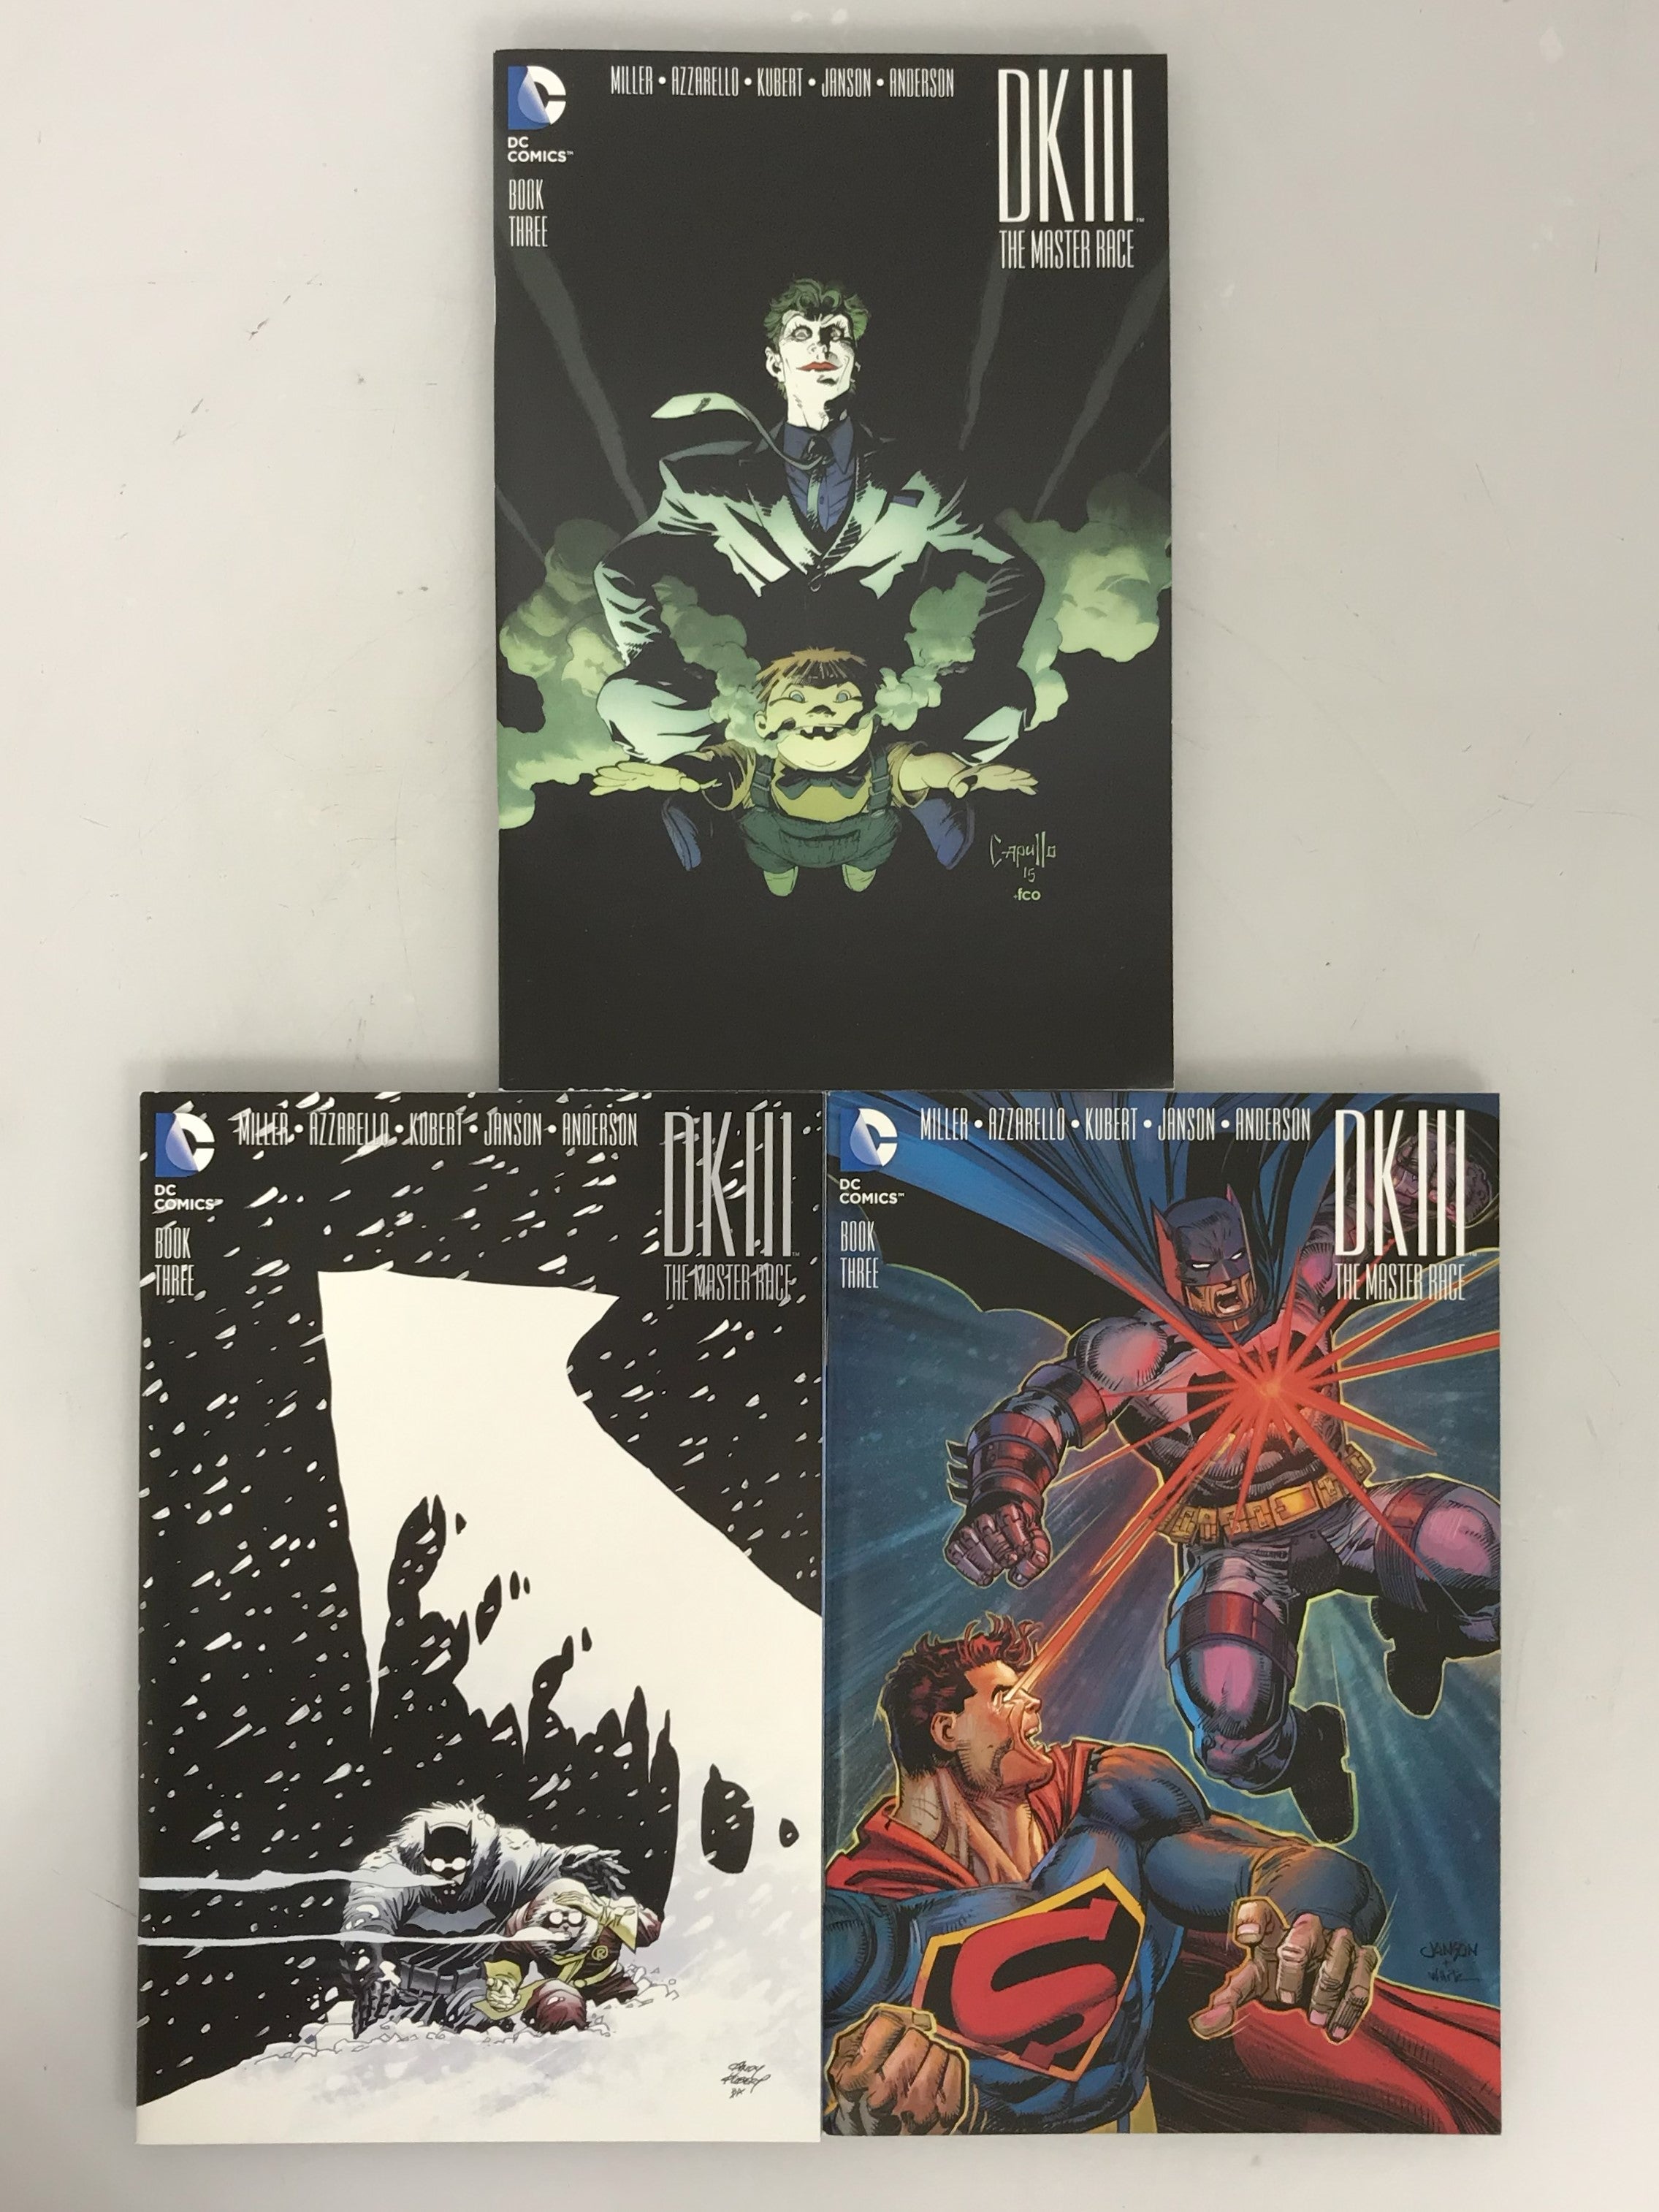 Lot of 3 Dark Knight III: The Master Race 3 2016 Variant Covers